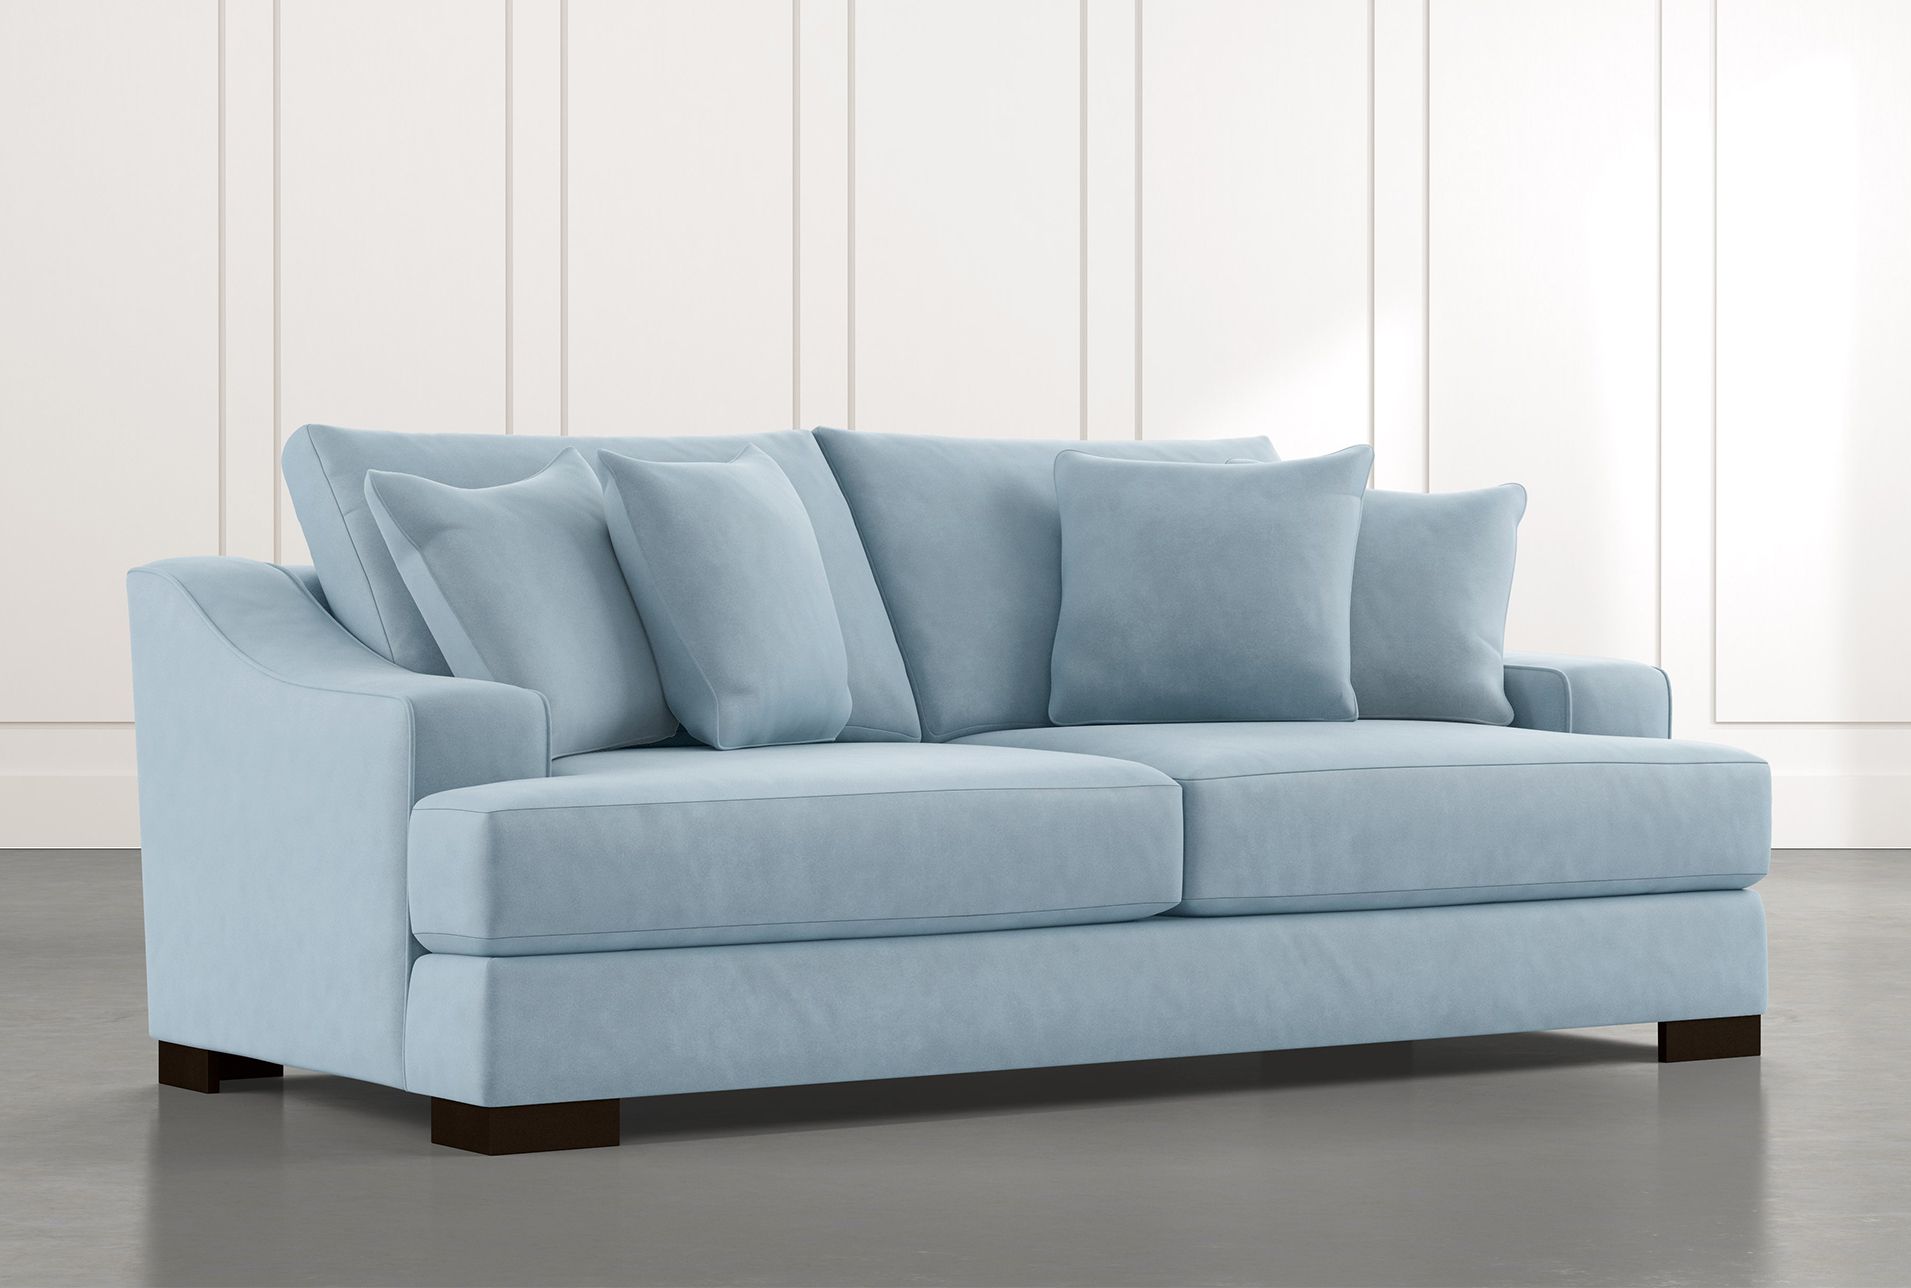 Lodge 96" Light Blue Sofa | Living Spaces Throughout Sofas In Blue (View 16 of 20)